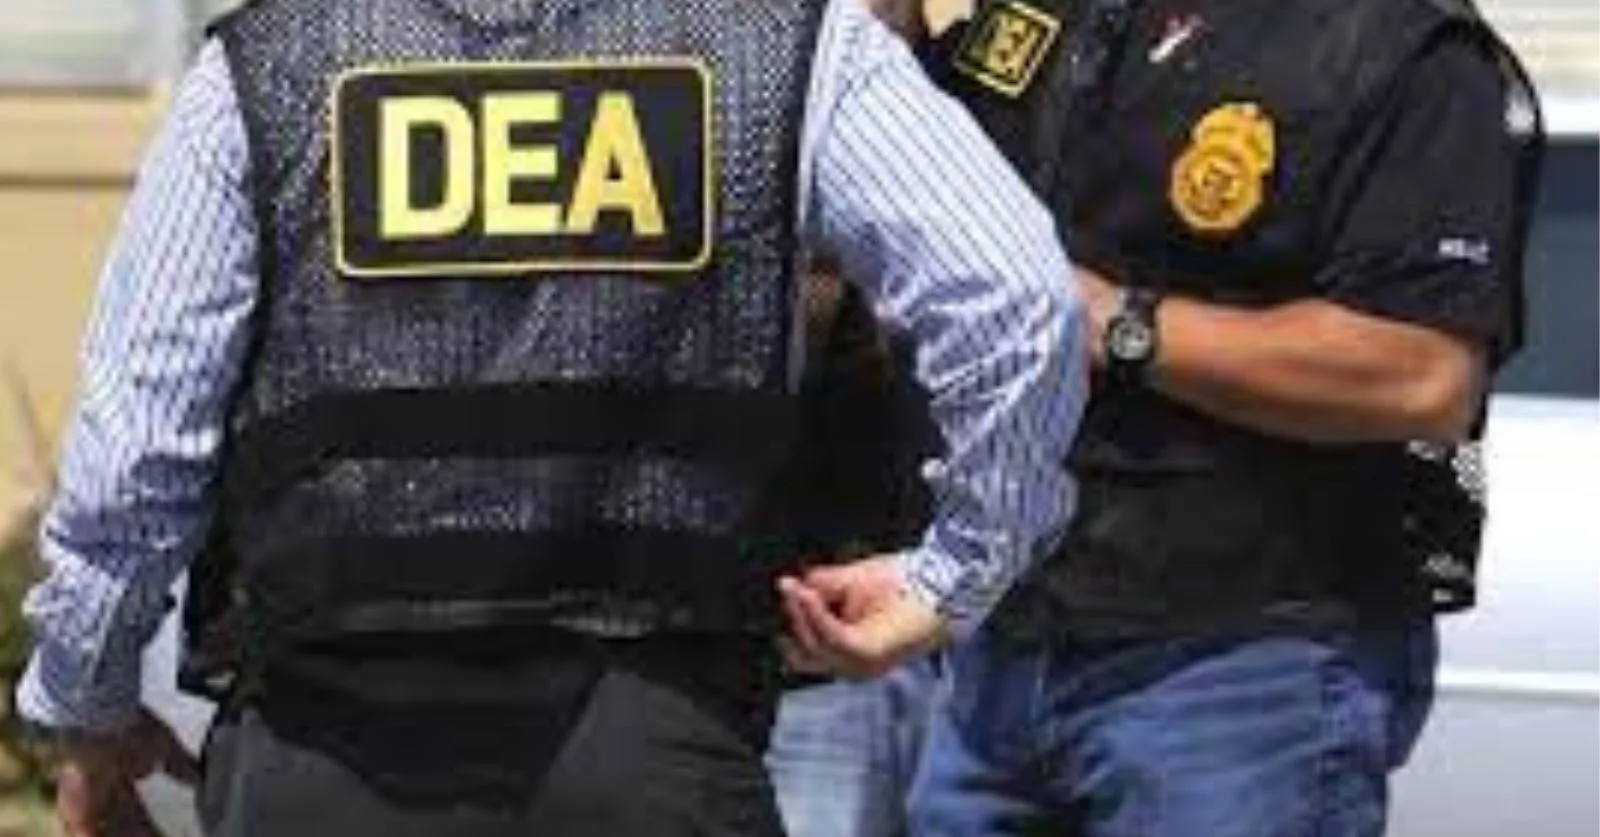 DEA operation seizes 44 million fentanyl pills and exposes cartels’ use of social media